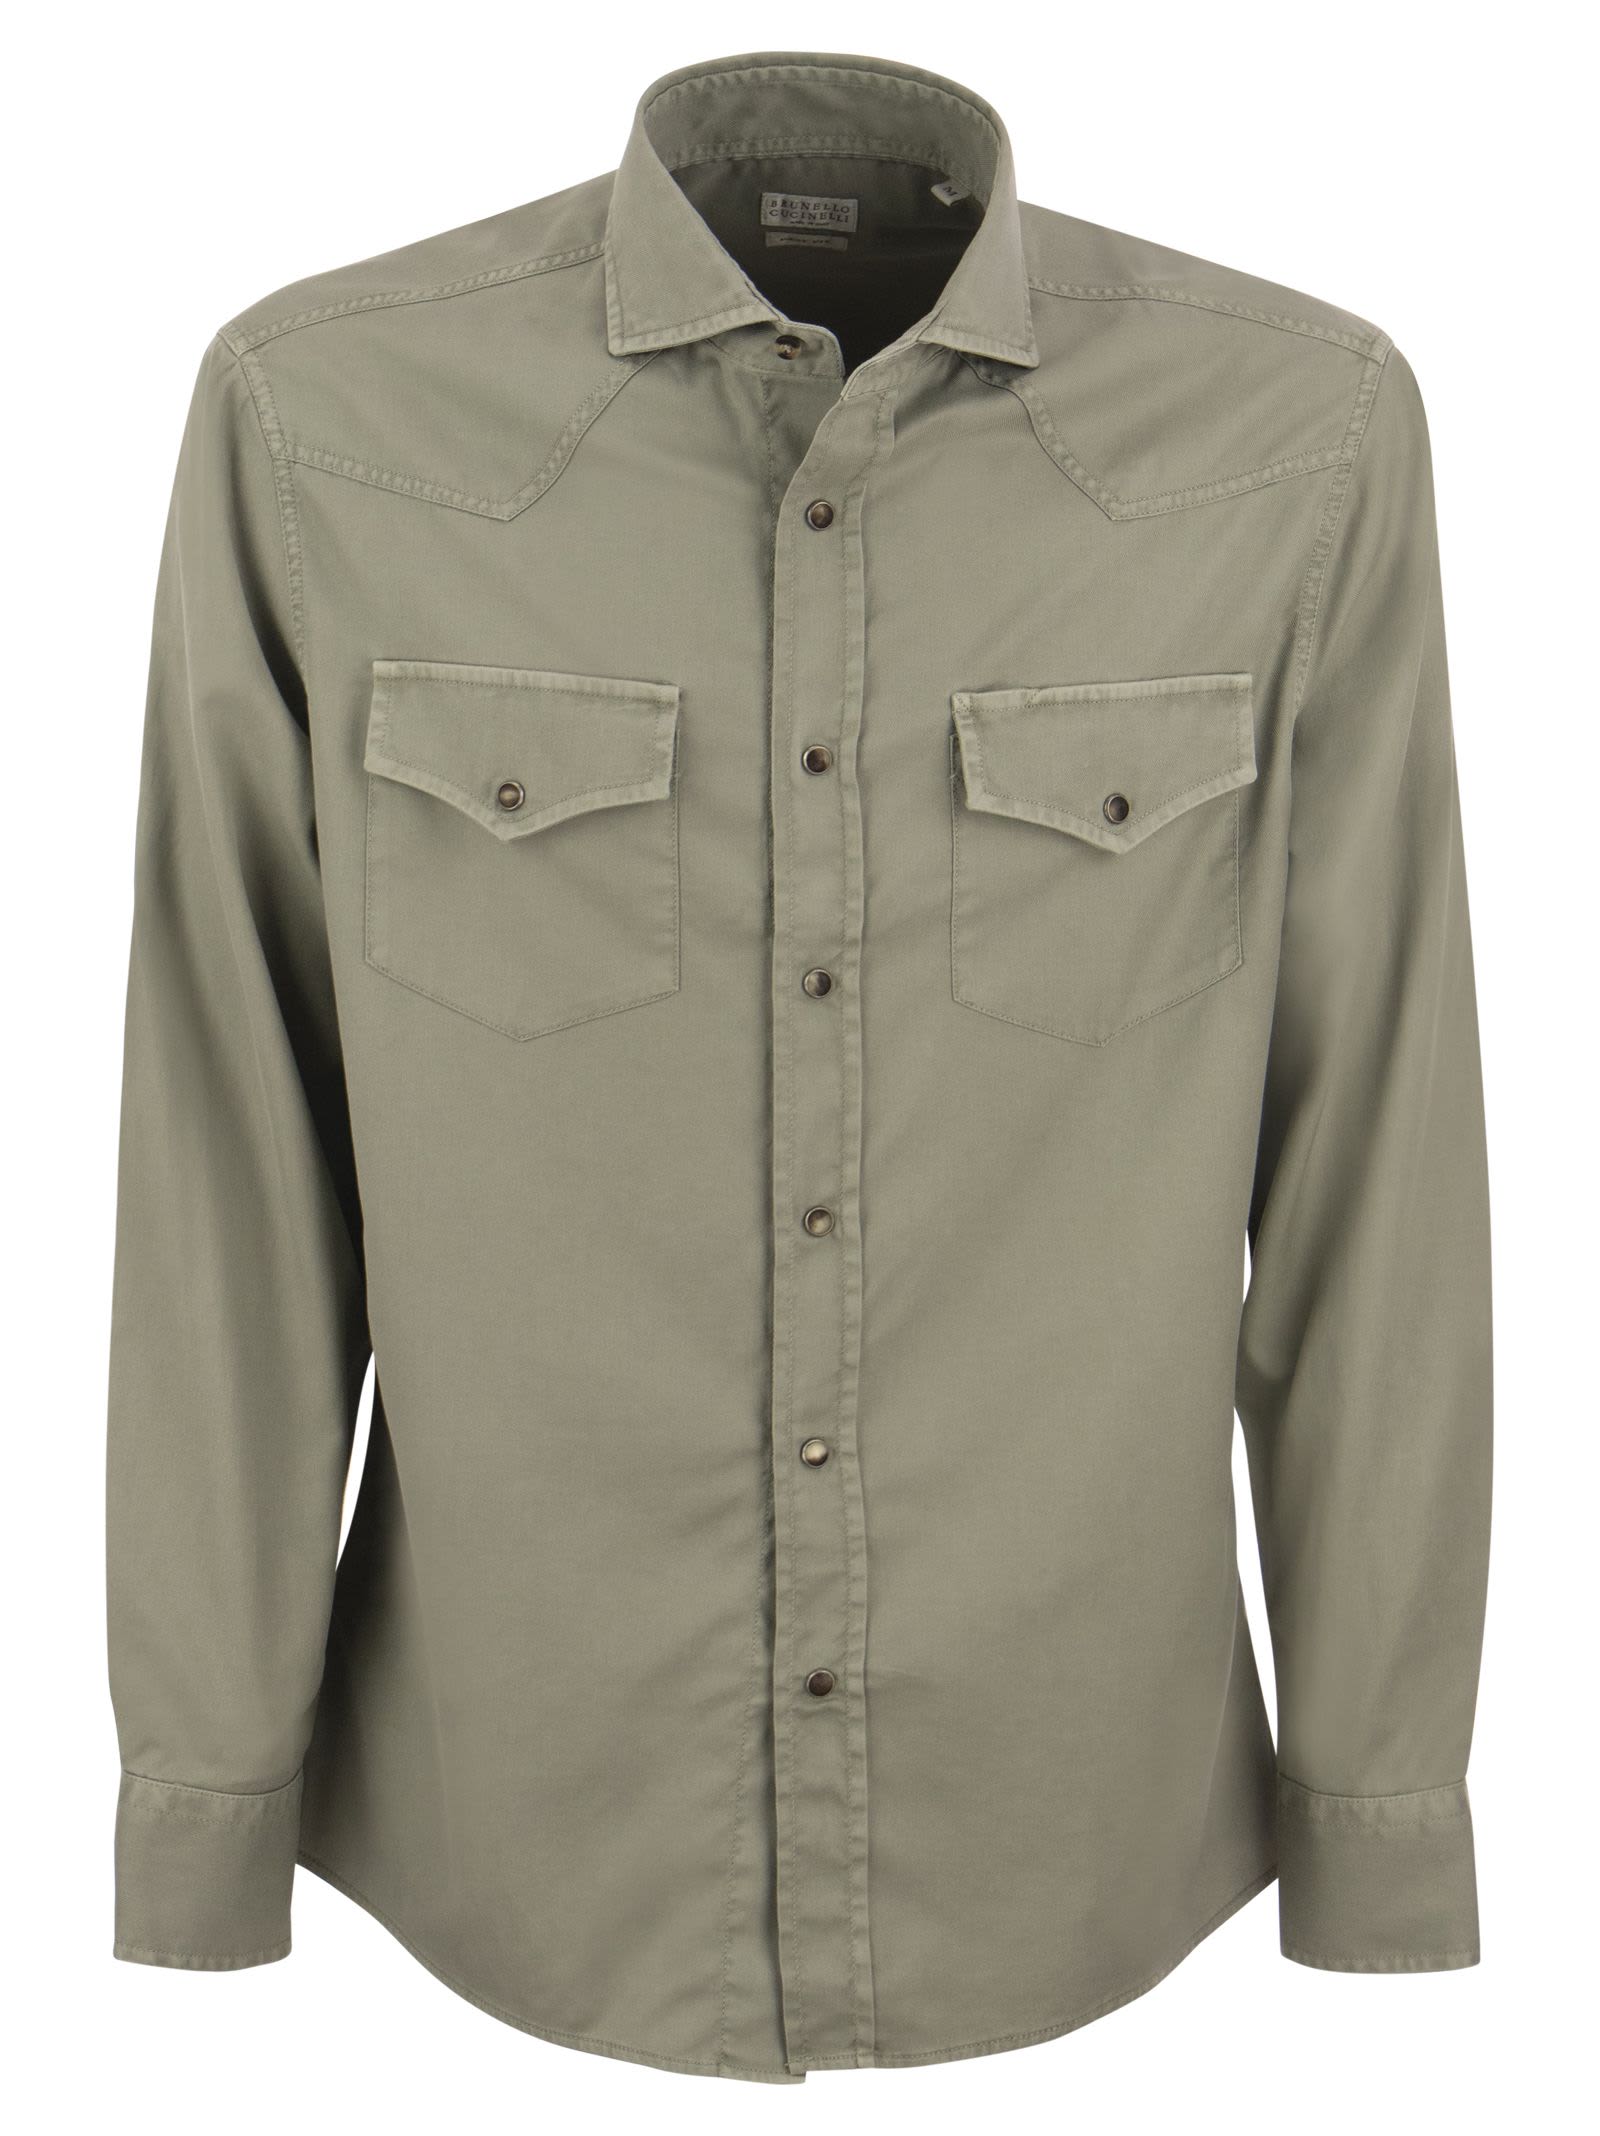 BRUNELLO CUCINELLI GARMENT-DYED EASY-FIT TWILL SHIRT WITH PRESS STUDS, EPAULETTES AND POCKETS